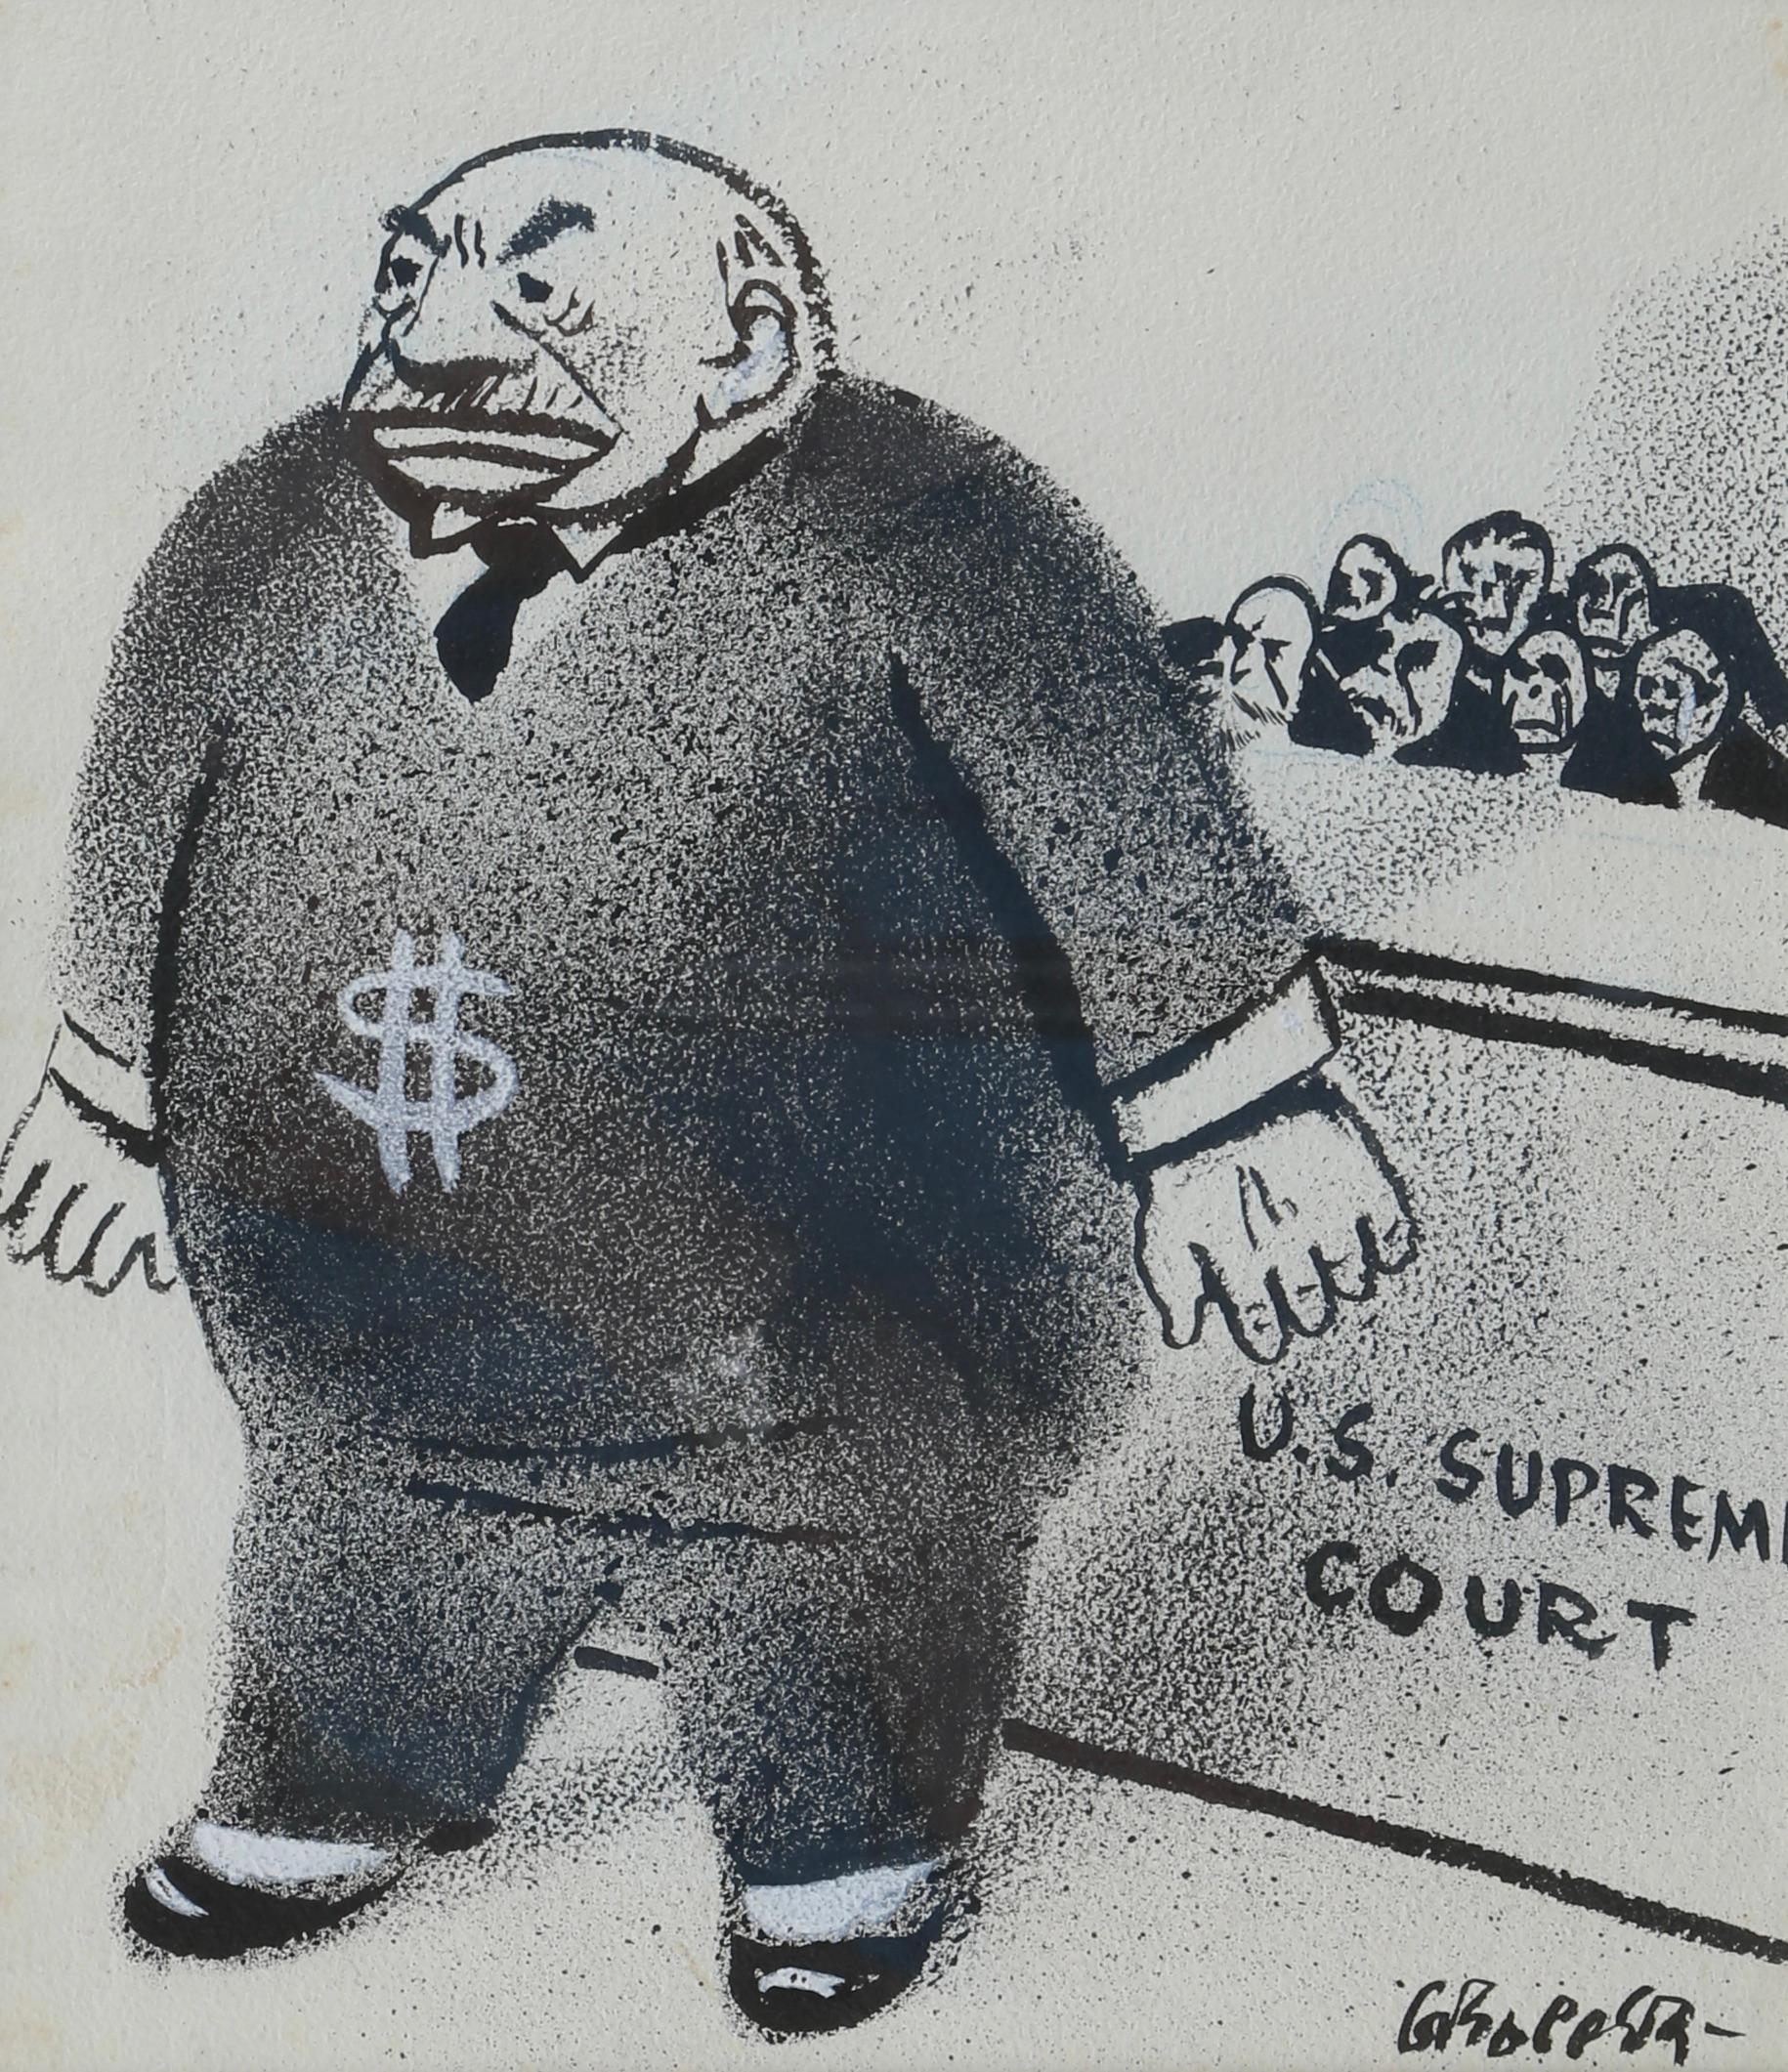 "Supreme Court" WPA Mid 20th Century Political Cartoon Social Realism Modern - Mixed Media Art by William Gropper